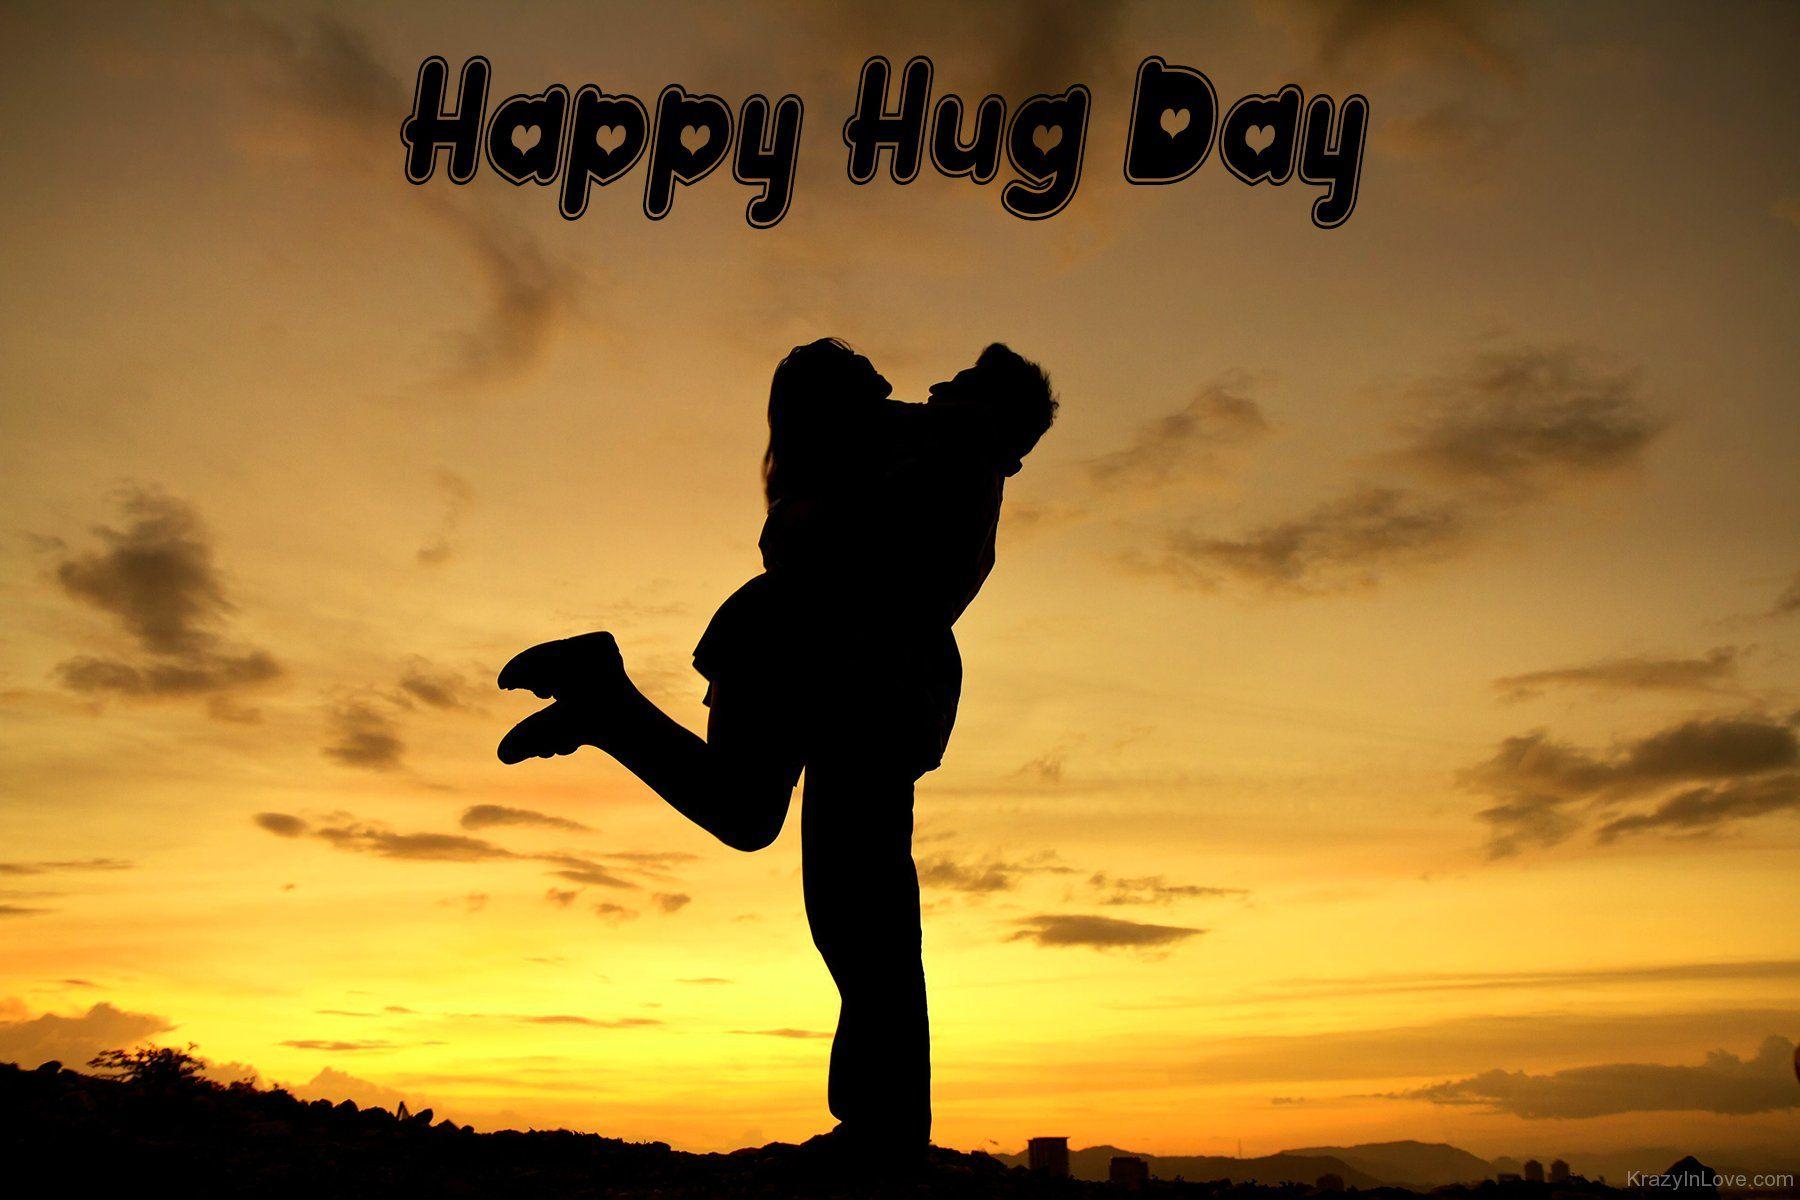 hug day couple image happy hug day 2014 wishes and quotes